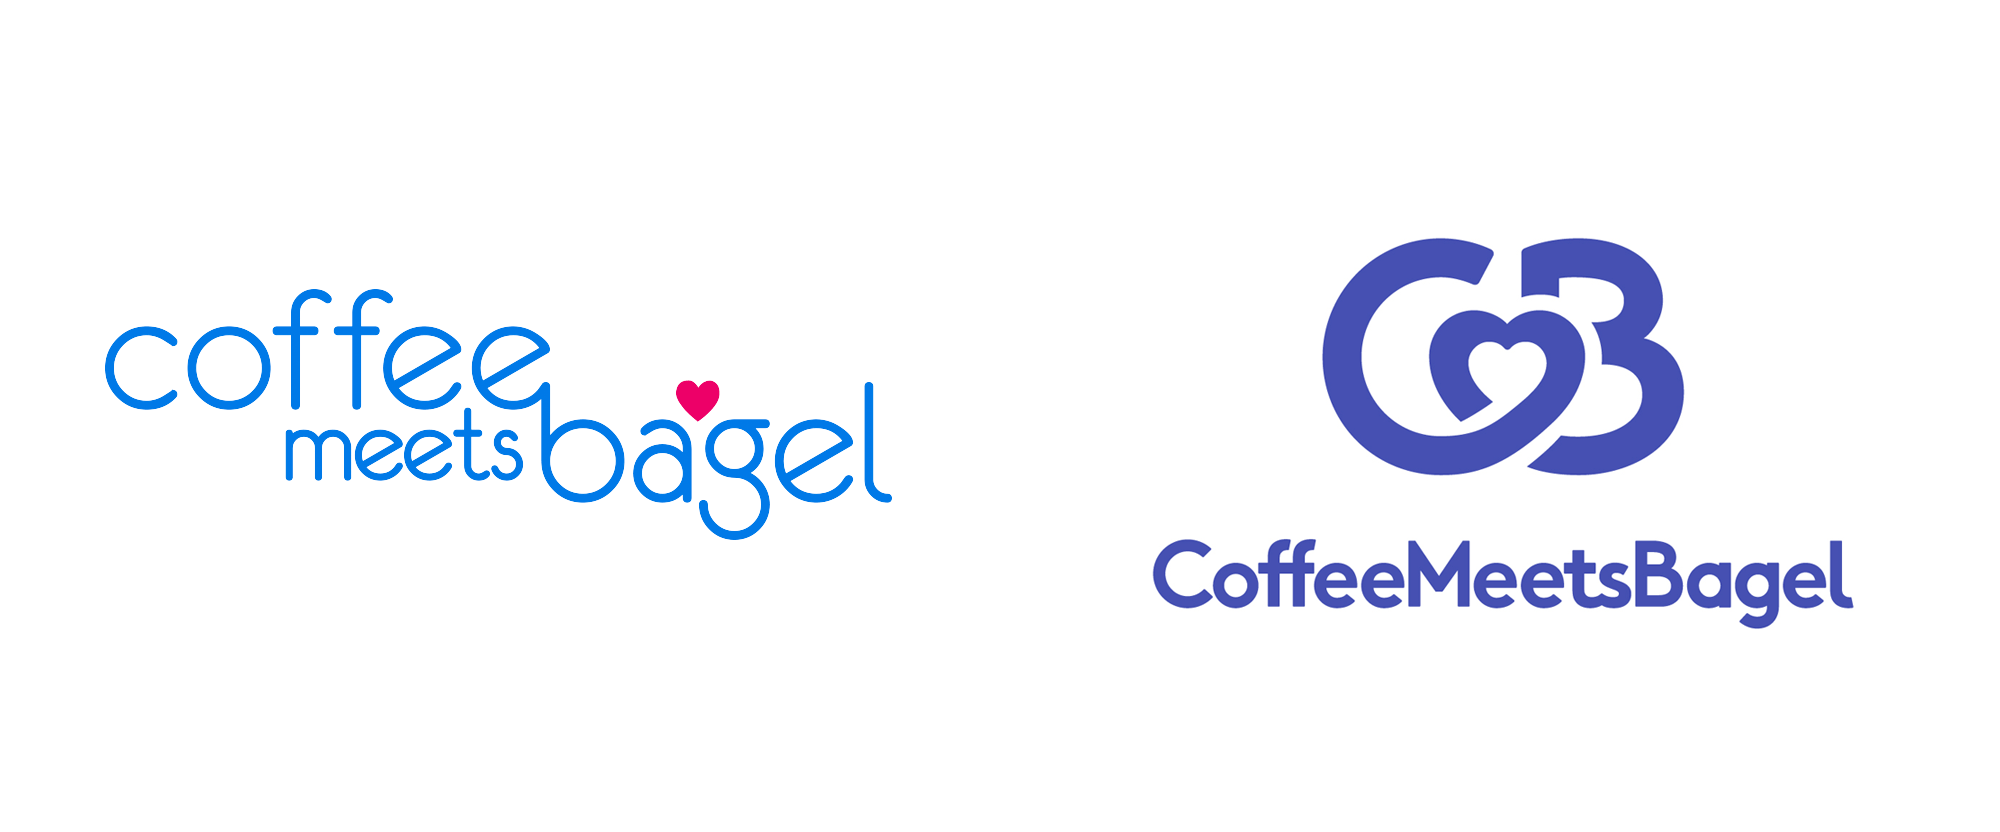 Coffee Meets Bagel Logo - Brand New: New Logo and Identity for Coffee Meets Bagel